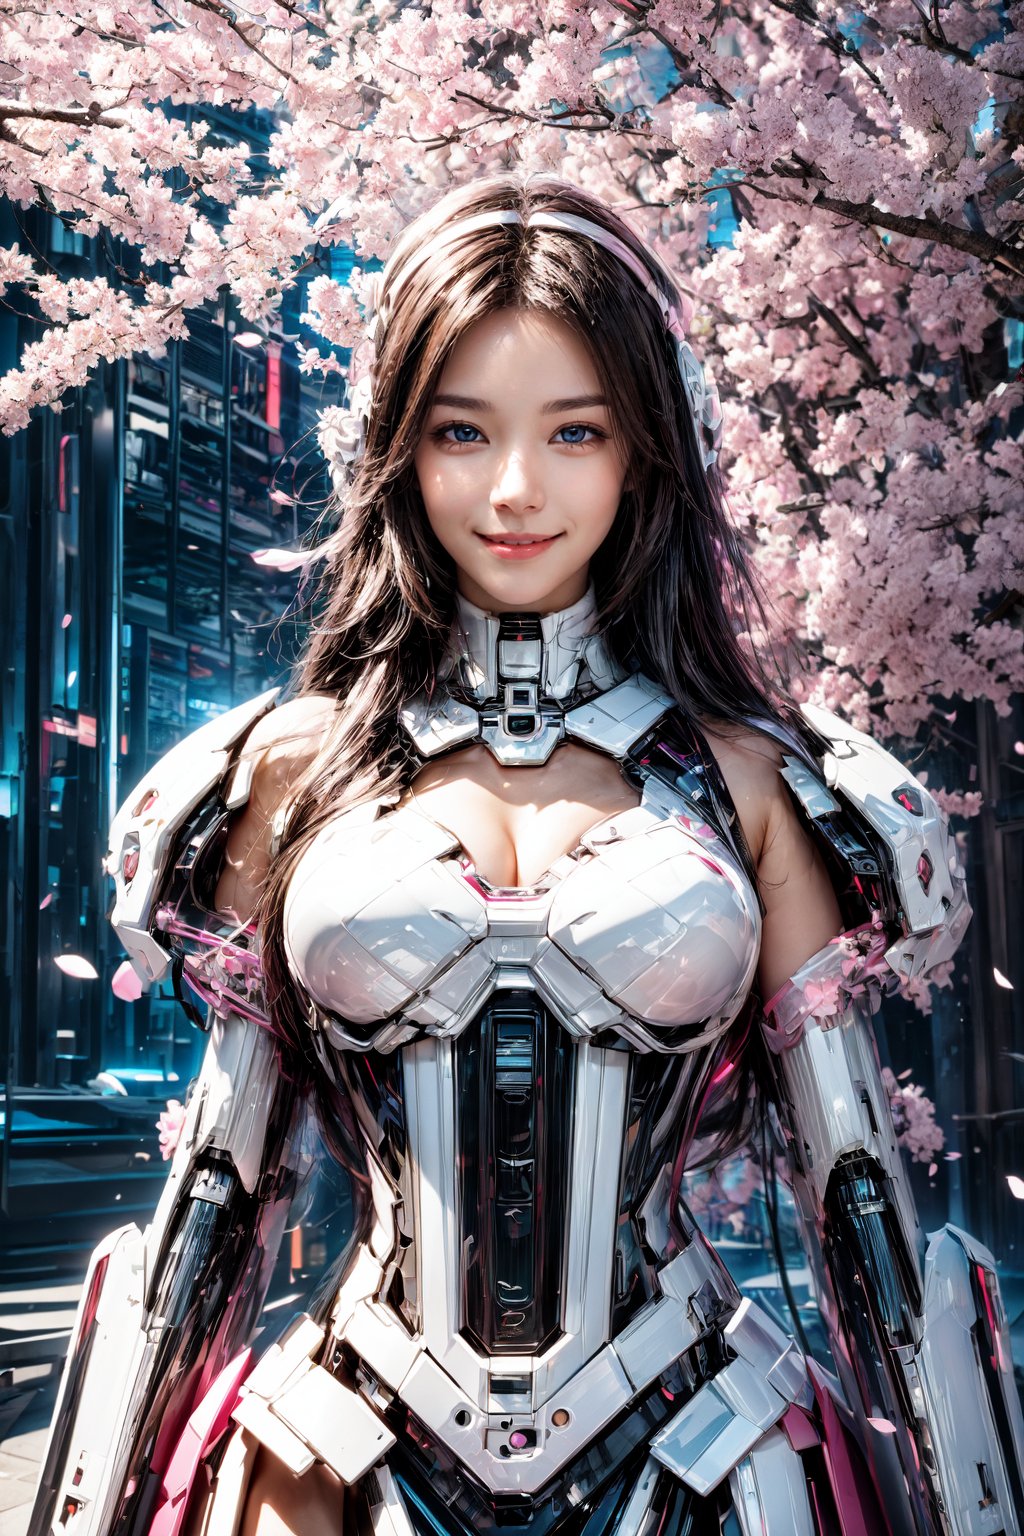 Masterpiece, High quality, 64K, Unity 64K Wallpaper, HDR, Best Quality, RAW, Super Fine Photography, Super High Resolution, Super Detailed, 
Beautiful and Aesthetic, Stunningly beautiful, Perfect proportions, 
1girl, Solo, White skin, Detailed skin, Realistic skin details, 
Futuristic Mecha, Arms Mecha, Dynamic pose, Battle stance, Swaying hair, by FuturEvoLab, 
Dark City Night, Cyberpunk city, Cyberpunk architecture, Future architecture, Fine architecture, Accurate architectural structure, Detailed complex busy background, Gorgeous, Cherry blossoms,
Sharp focus, Perfect facial features, Pure and pretty, Perfect eyes, Lively eyes, Elegant face, Delicate face, Exquisite face, Pink Mecha, 